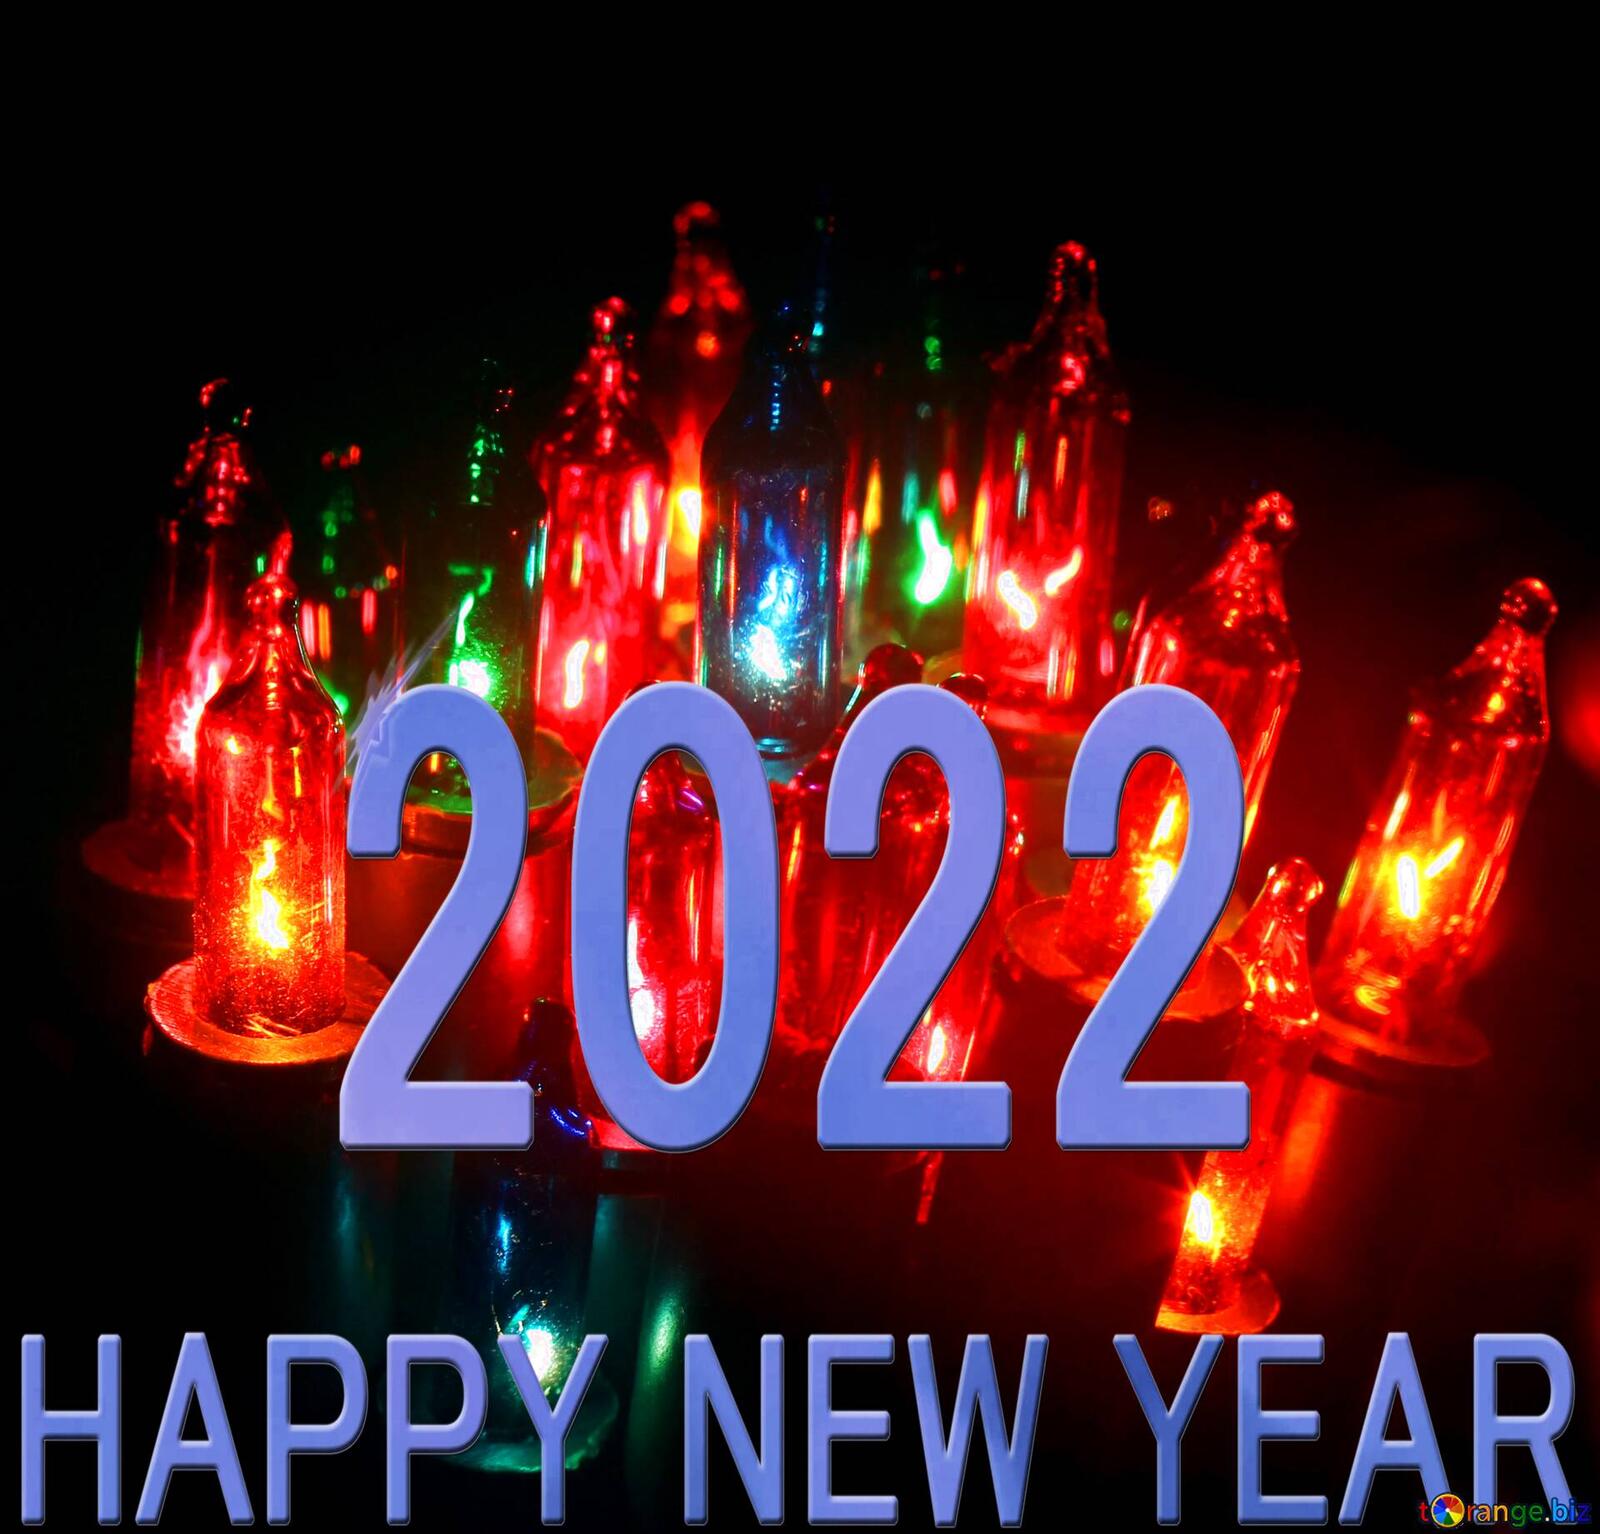 Wallpapers new year 2022 congratulations on the year 2022 holiday on the desktop